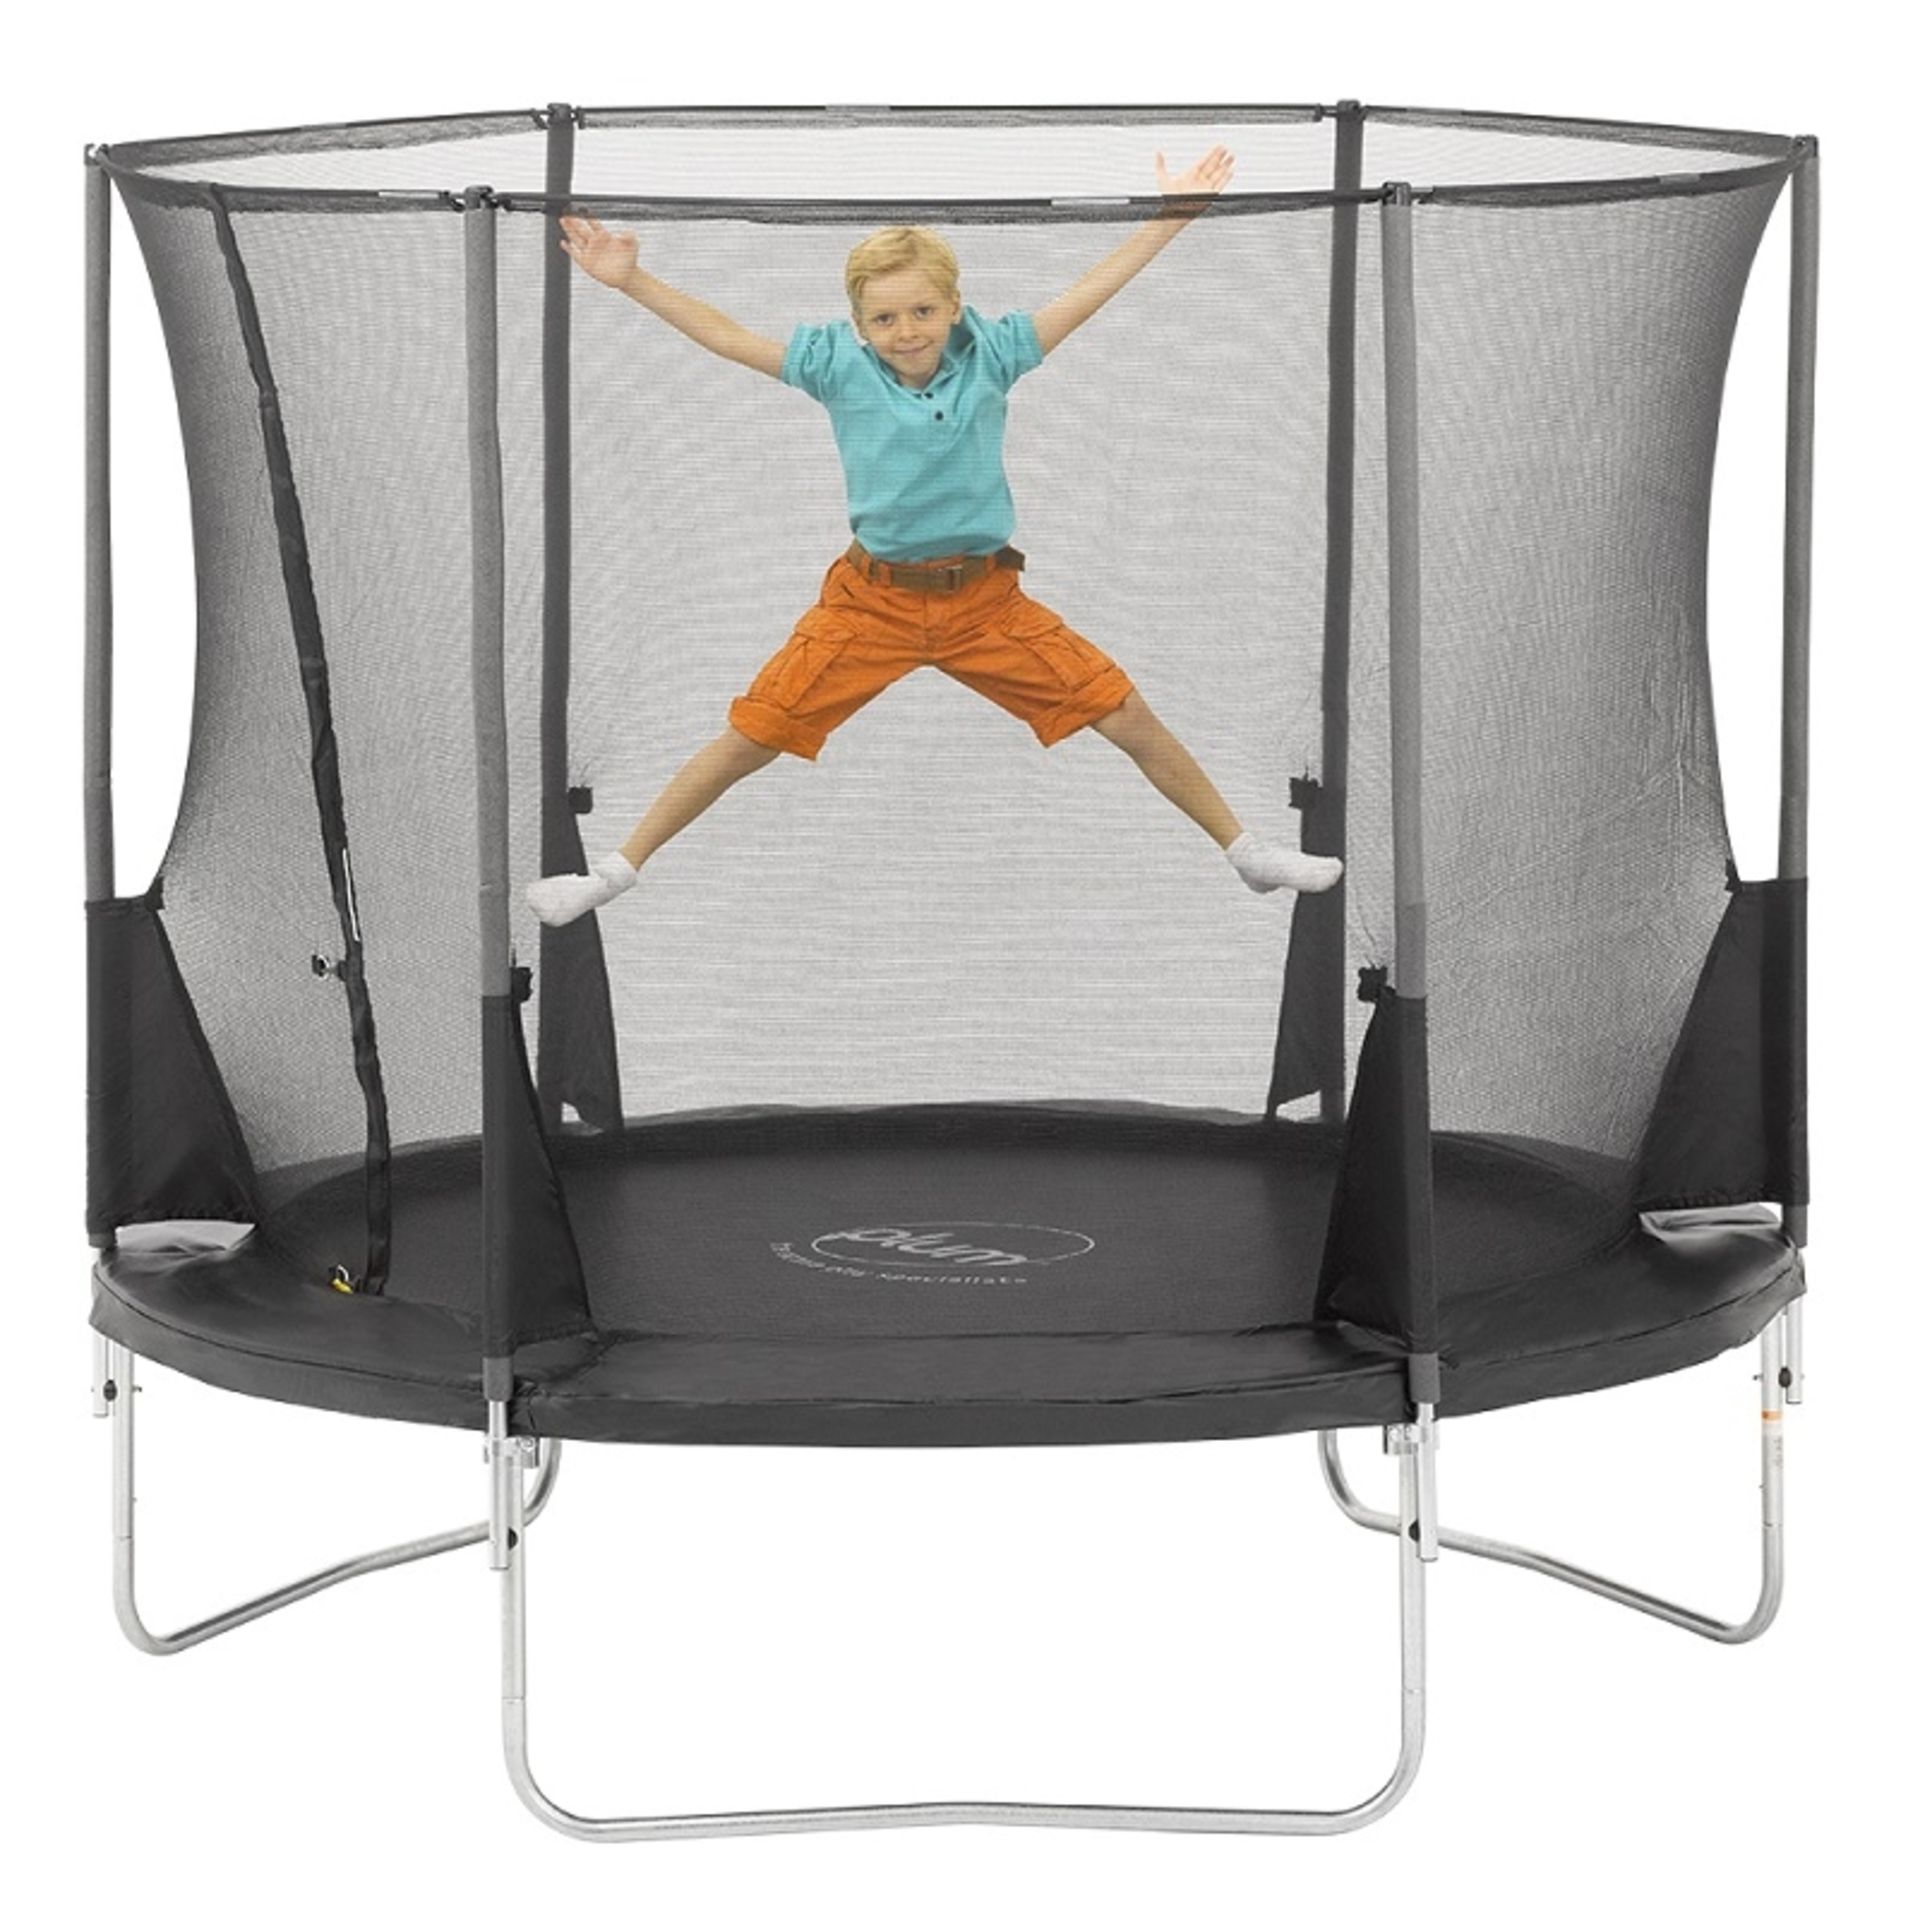 Plum 10ft Space Zone V2 Trampoline and Enclosure